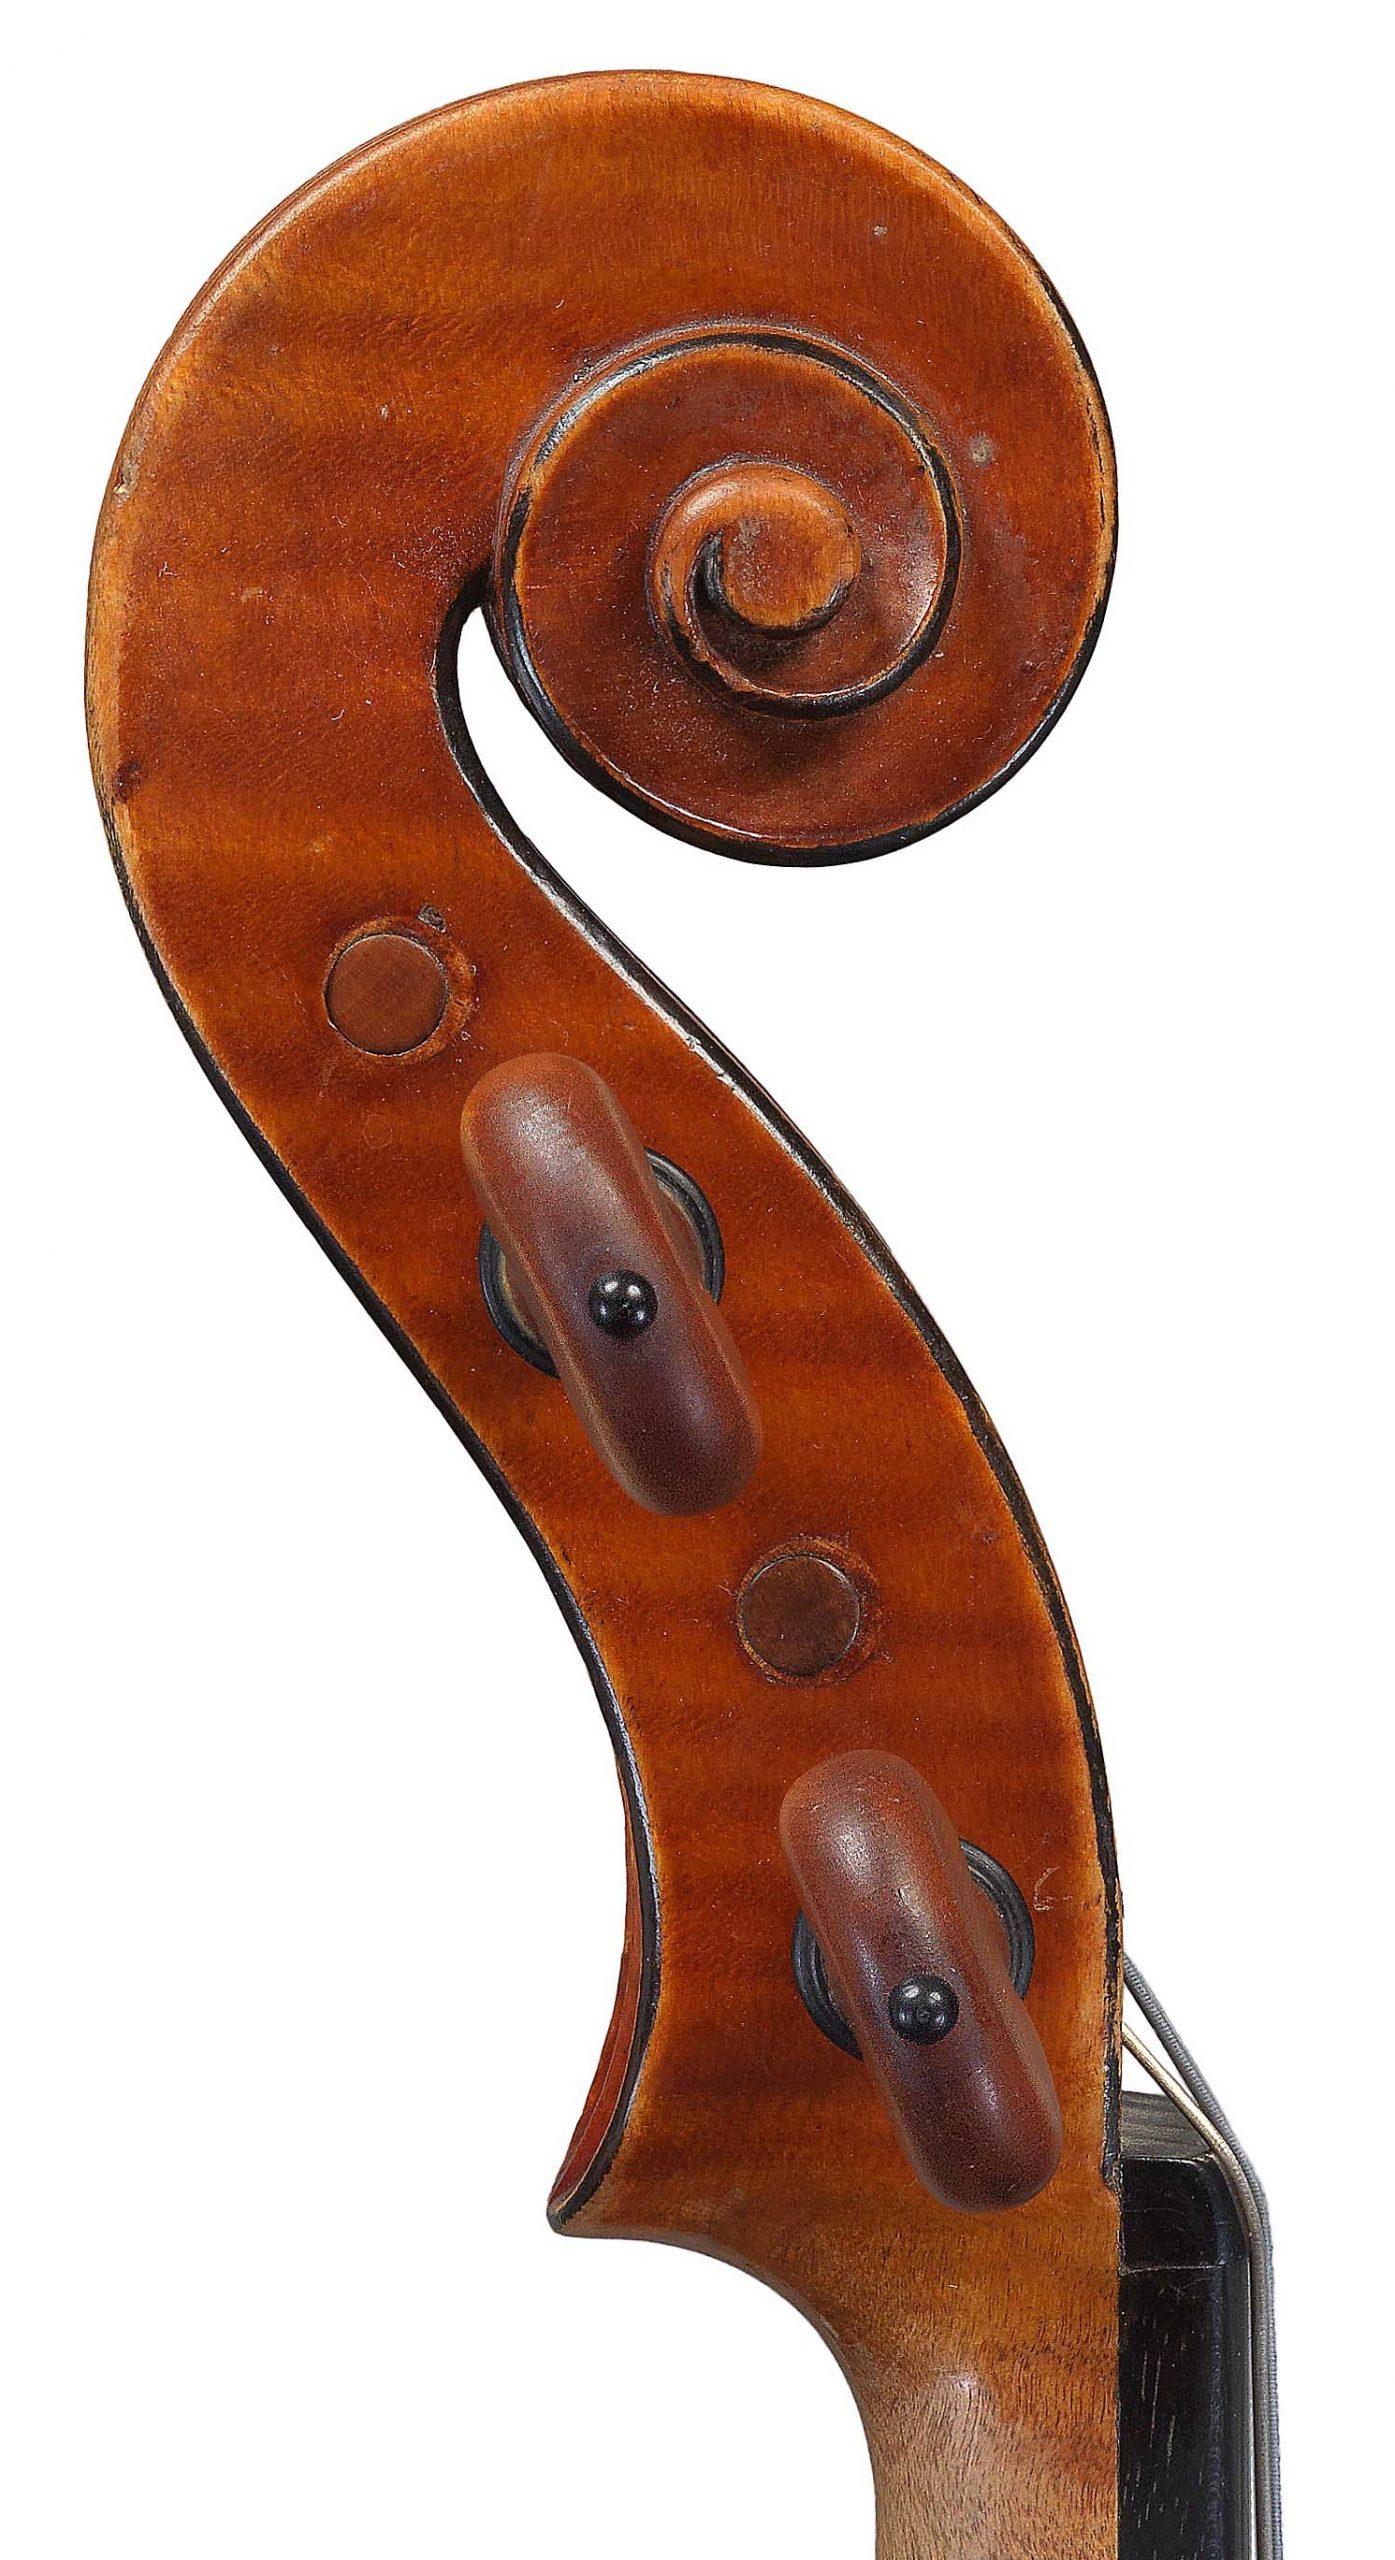 Scroll of a violin by JB Vuillaume, King of Portugal, dated 1873, exhibited by Ingles & Hayday at Sotheby's in 2012